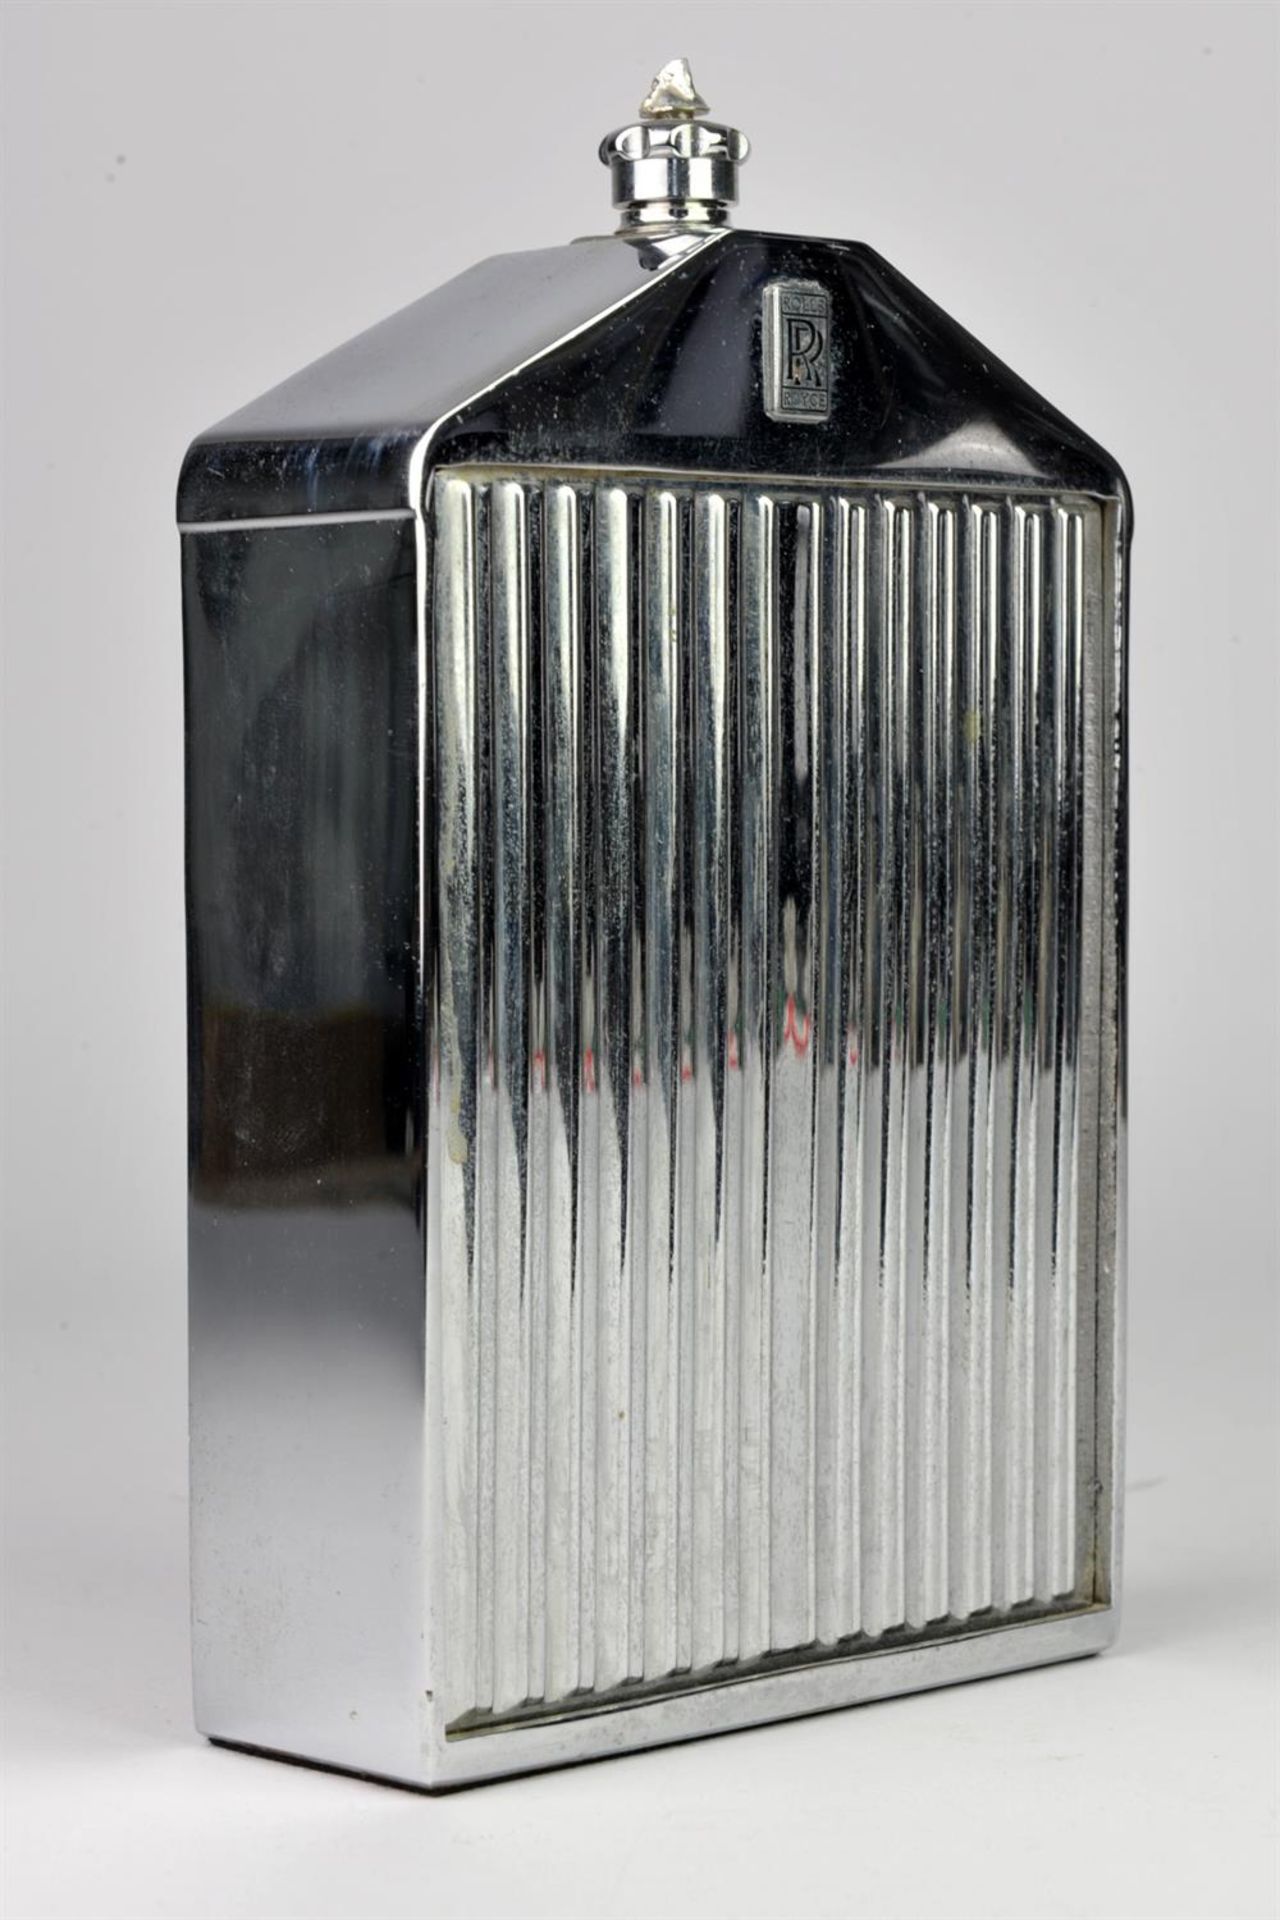 A Ruddspeed Ltd Rolls Royce Chrome plated car grill decanter, 21cm high - Image 3 of 4